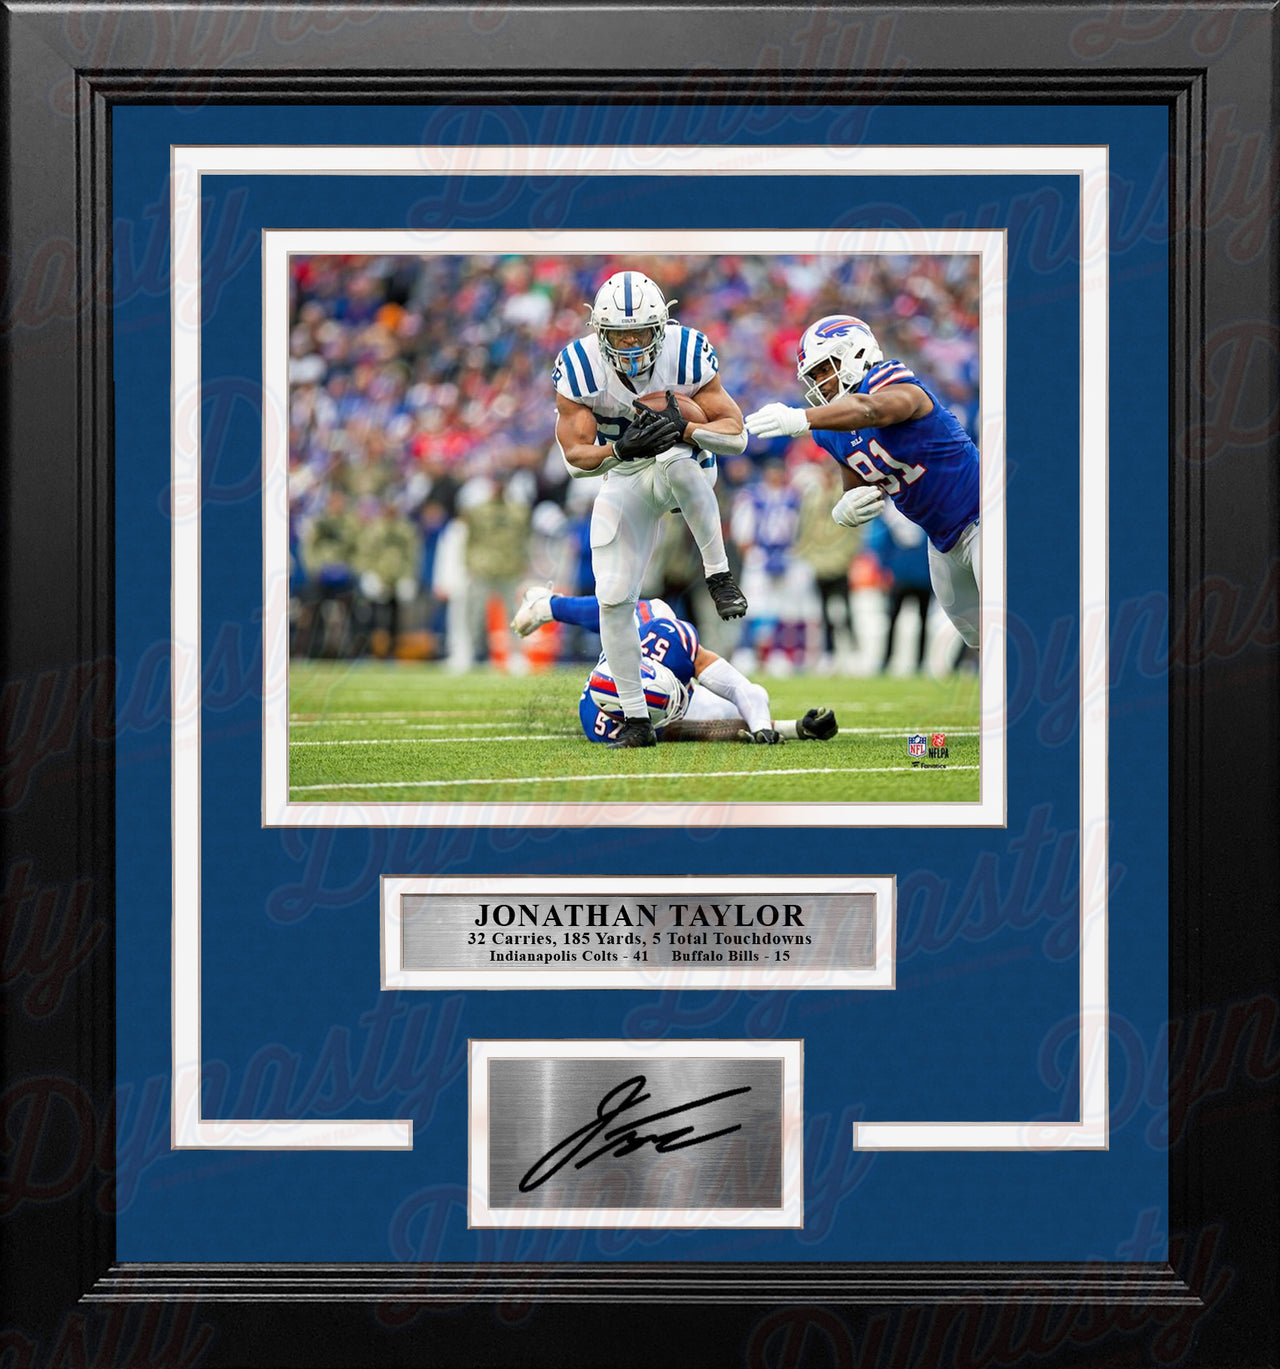 Jonathan Taylor 5 Touchdown Game Indianapolis Colts 8" x 10" Framed Football Photo with Engraved Autograph - Dynasty Sports & Framing 